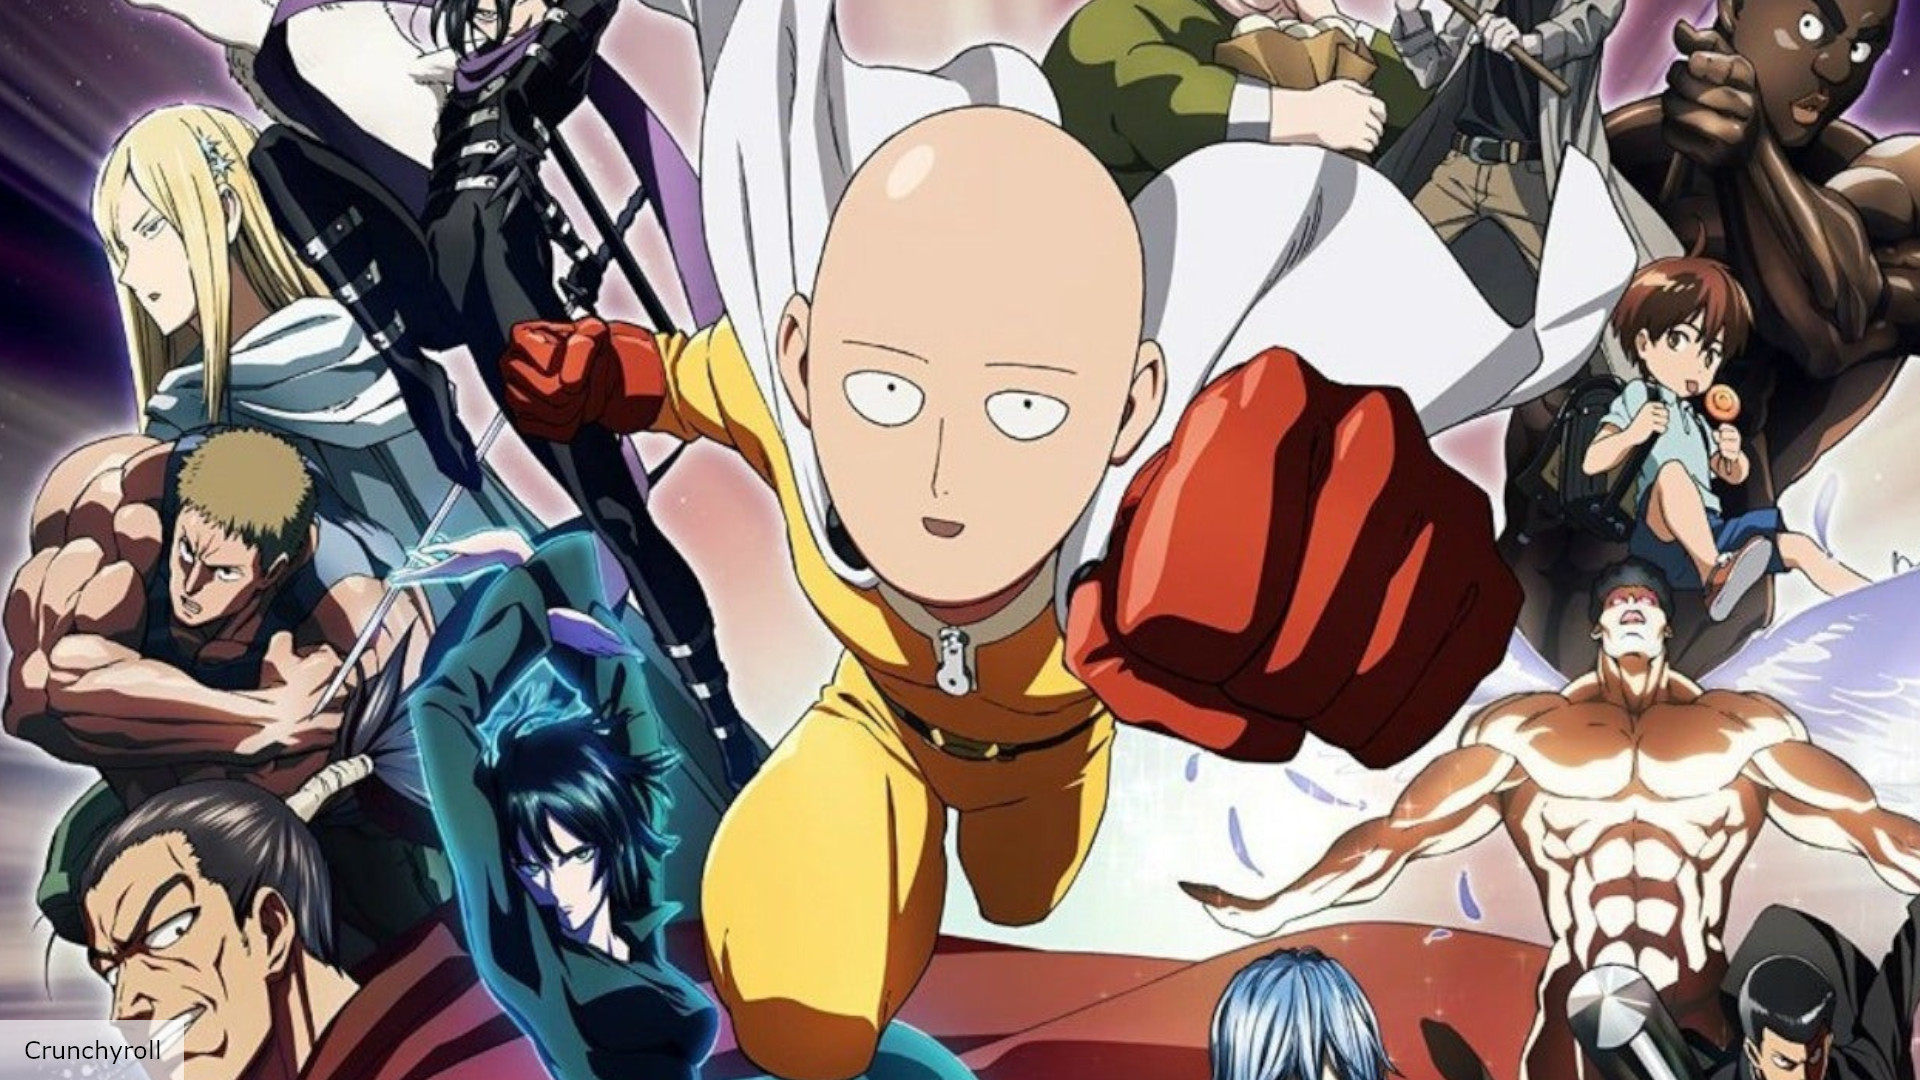 One-Punch Man season 3 release date speculation, plot, cast, and more | The Digital Fix